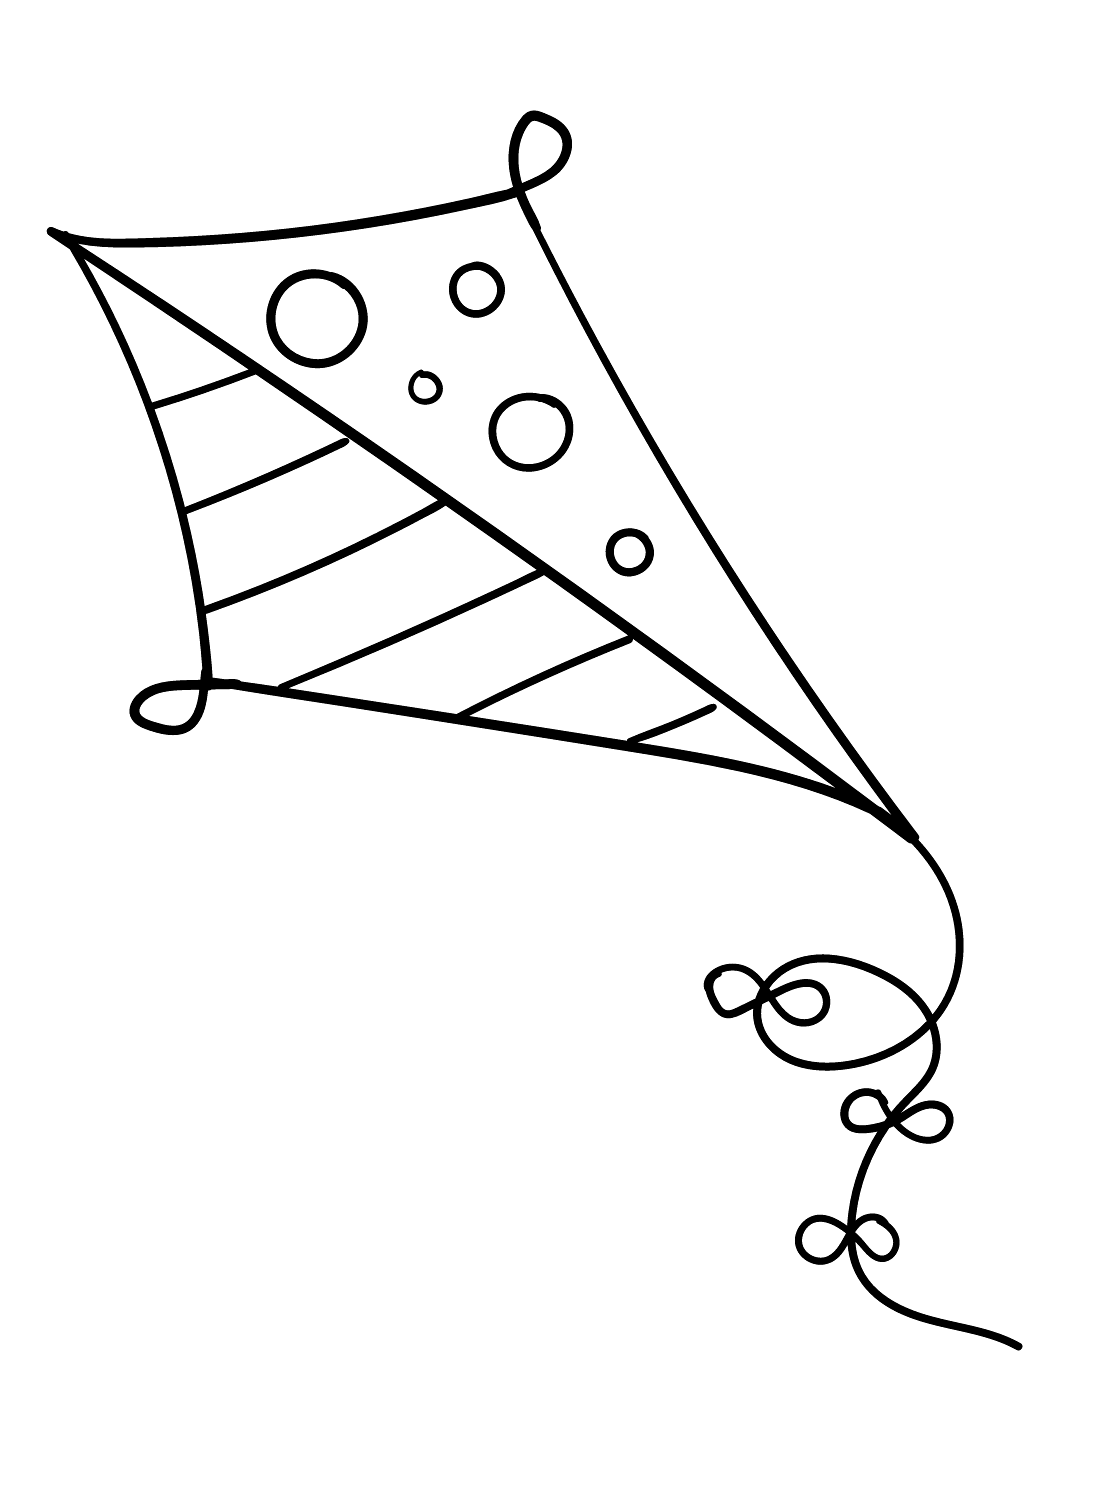 Kite Images Coloring Page